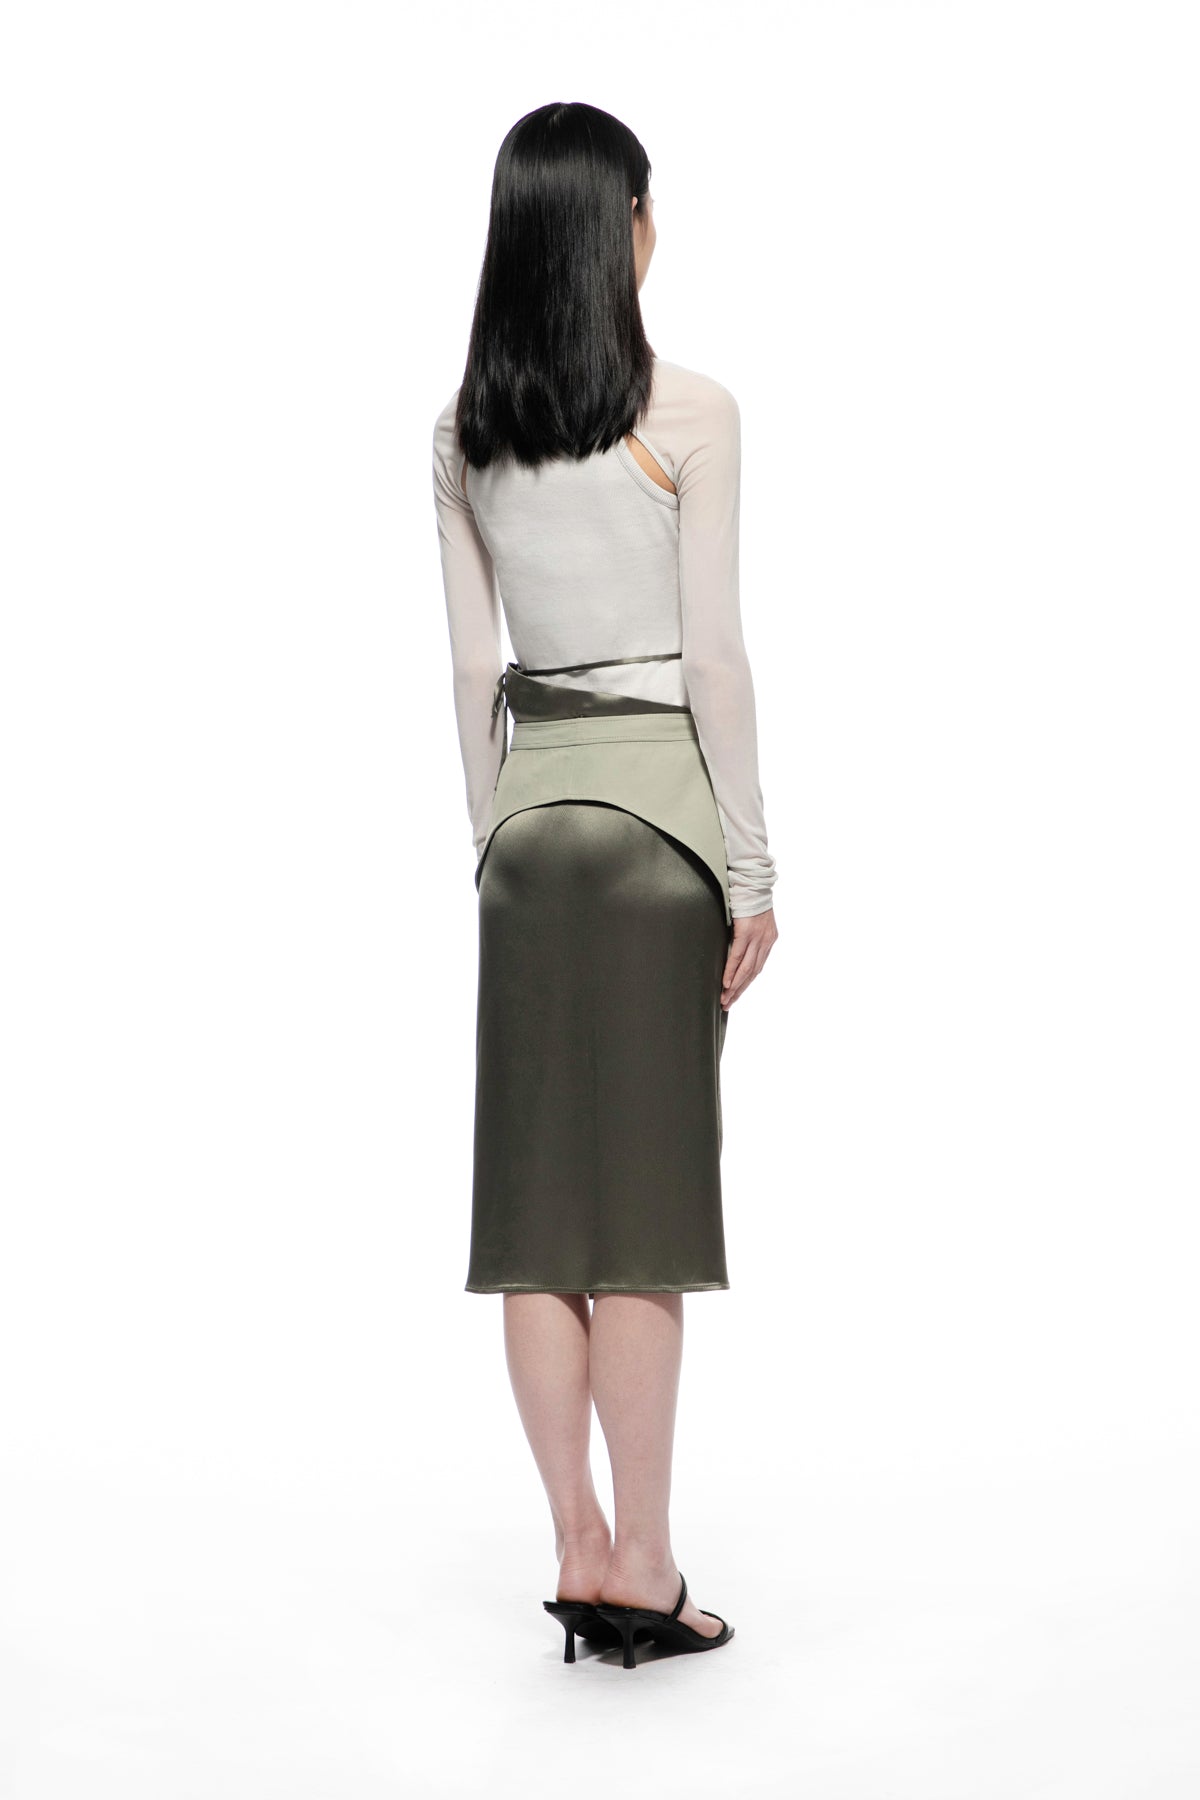 PRIVATE POLICY - Double Layers Draping Tie Strap Skirt, buy at doors.nyc